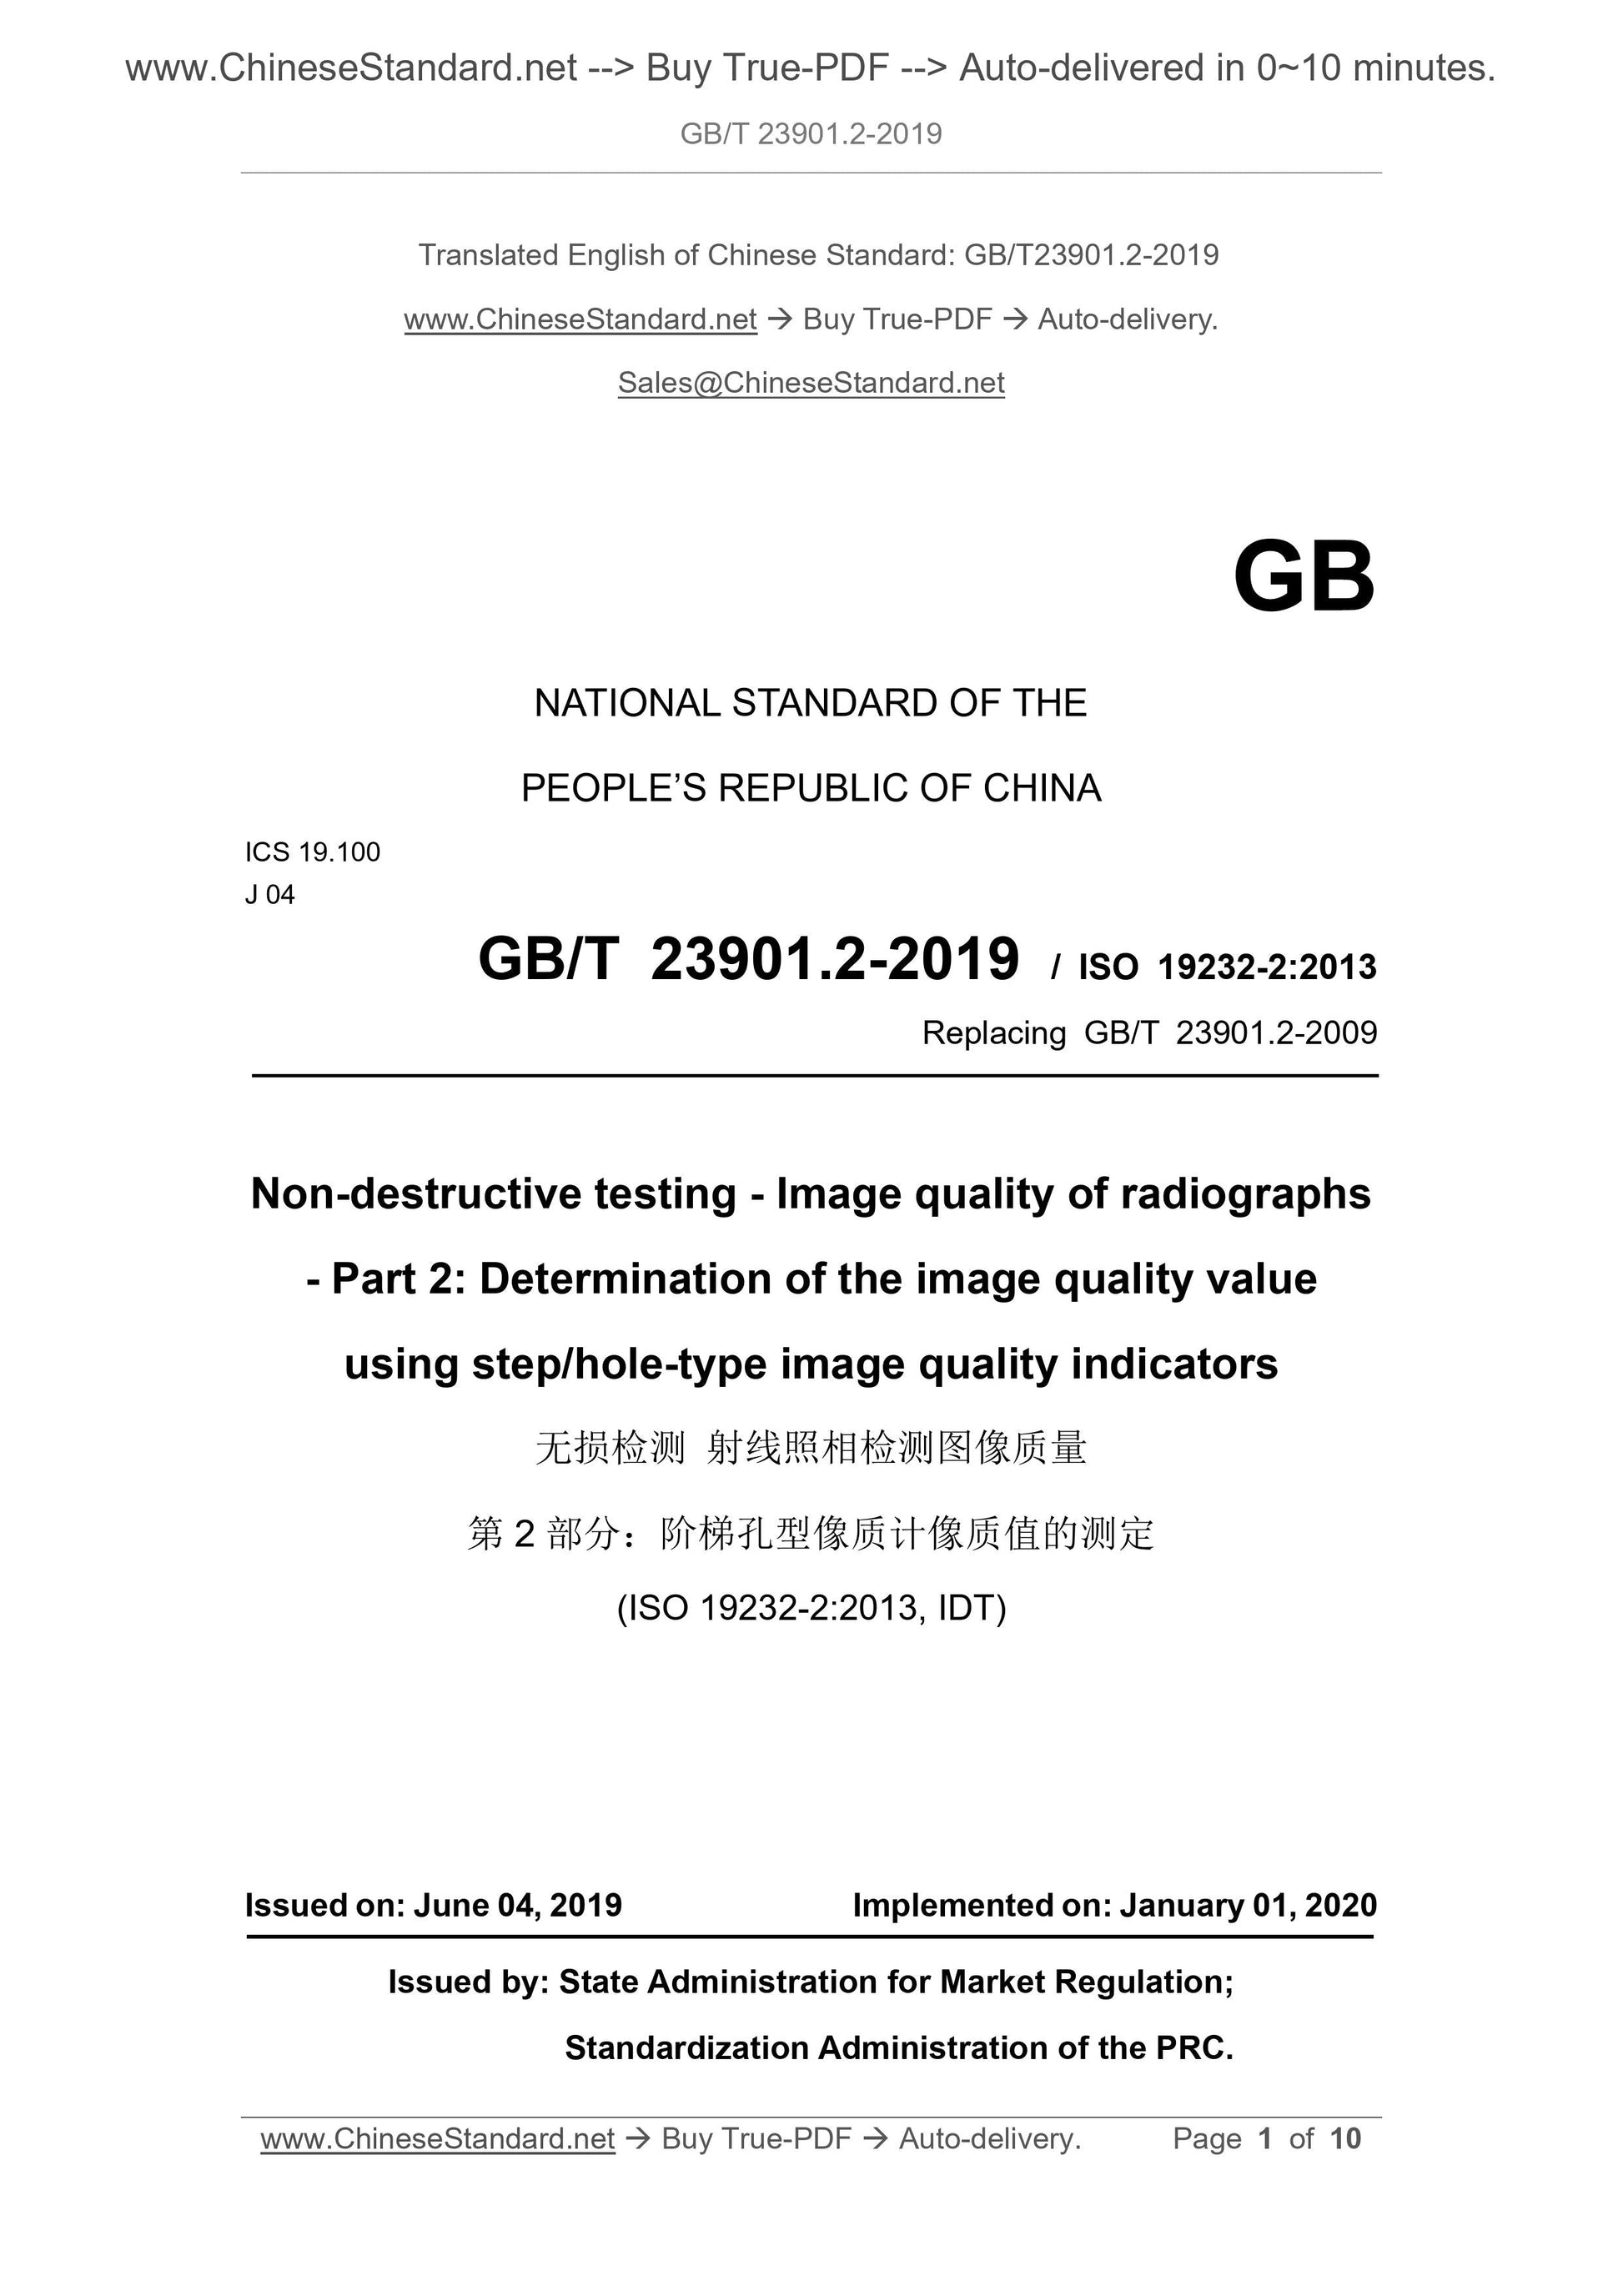 GB/T 23901.2-2019 Page 1